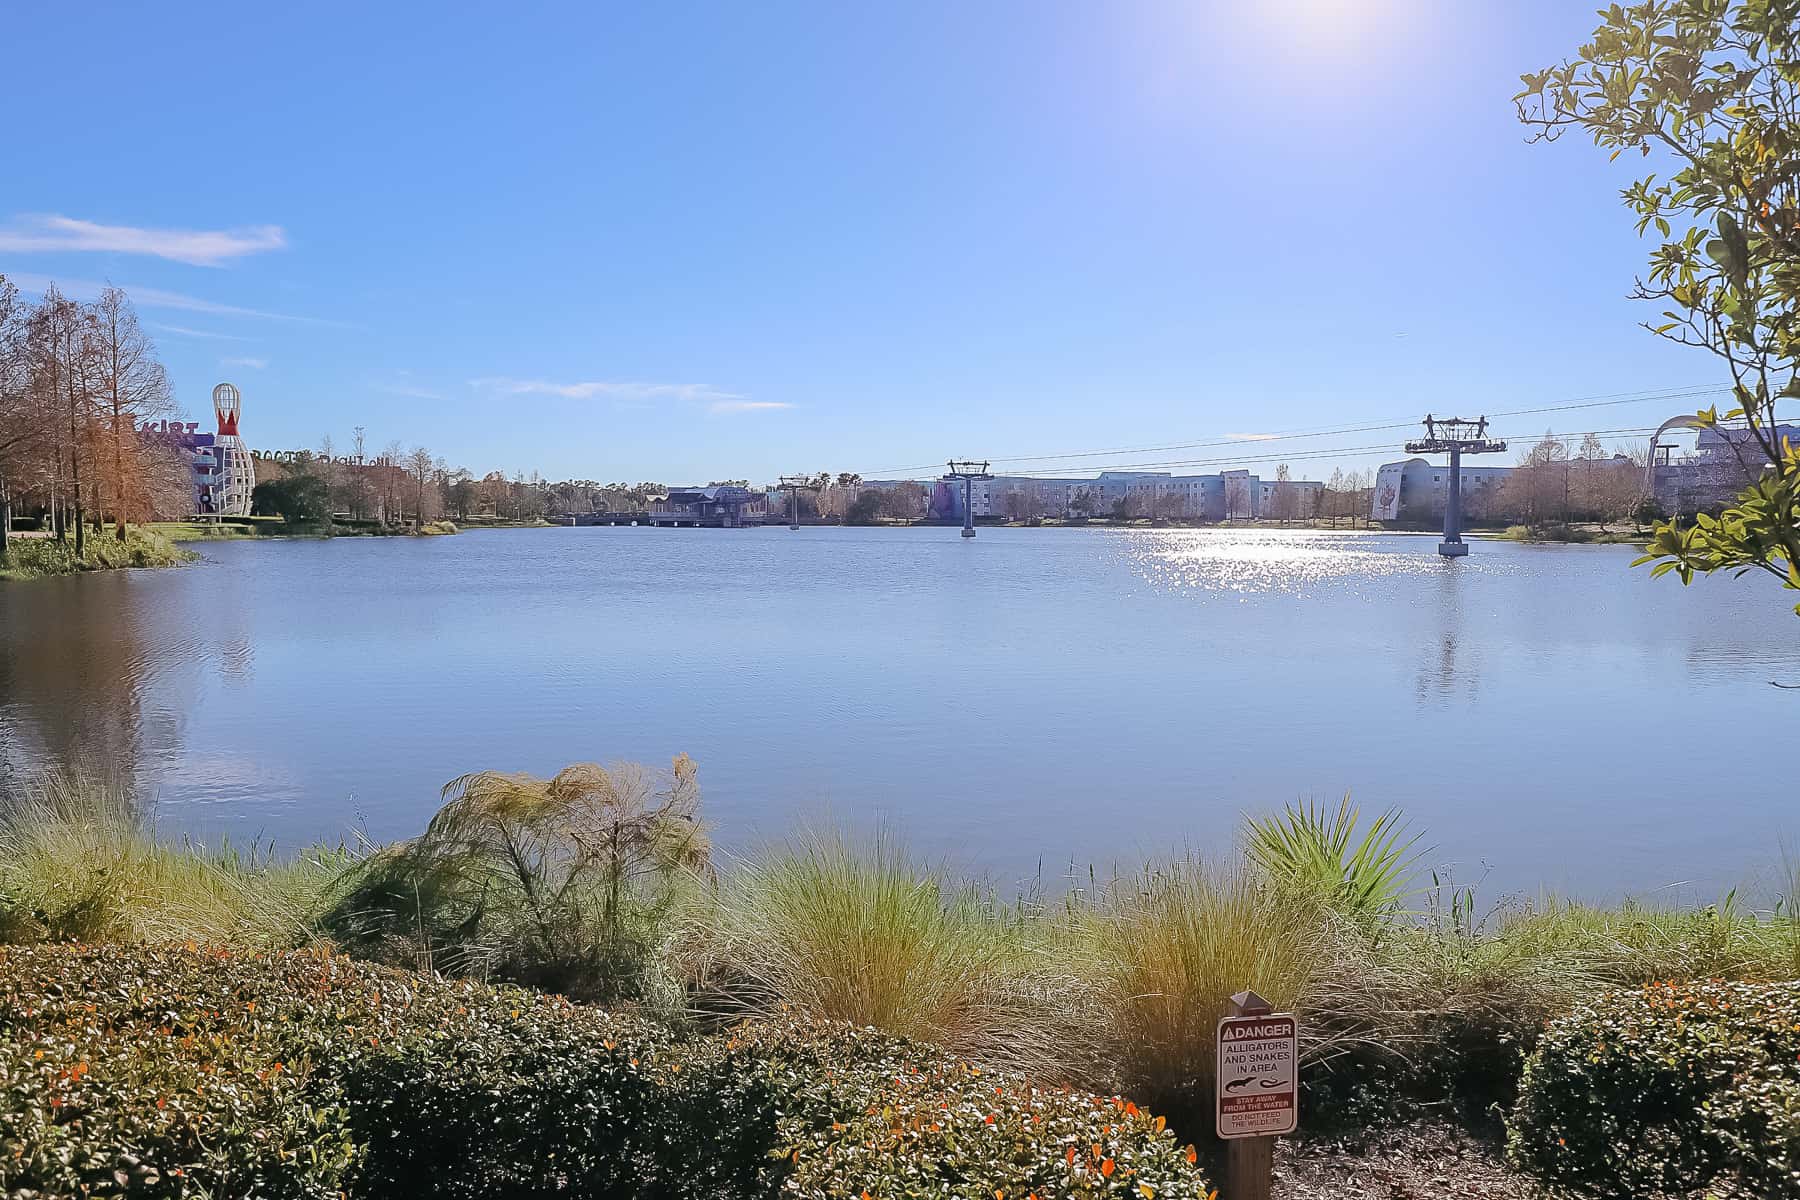 A view of Hourglass Lake from the edge of Pop Century between the 50s and Little Mermaid section.